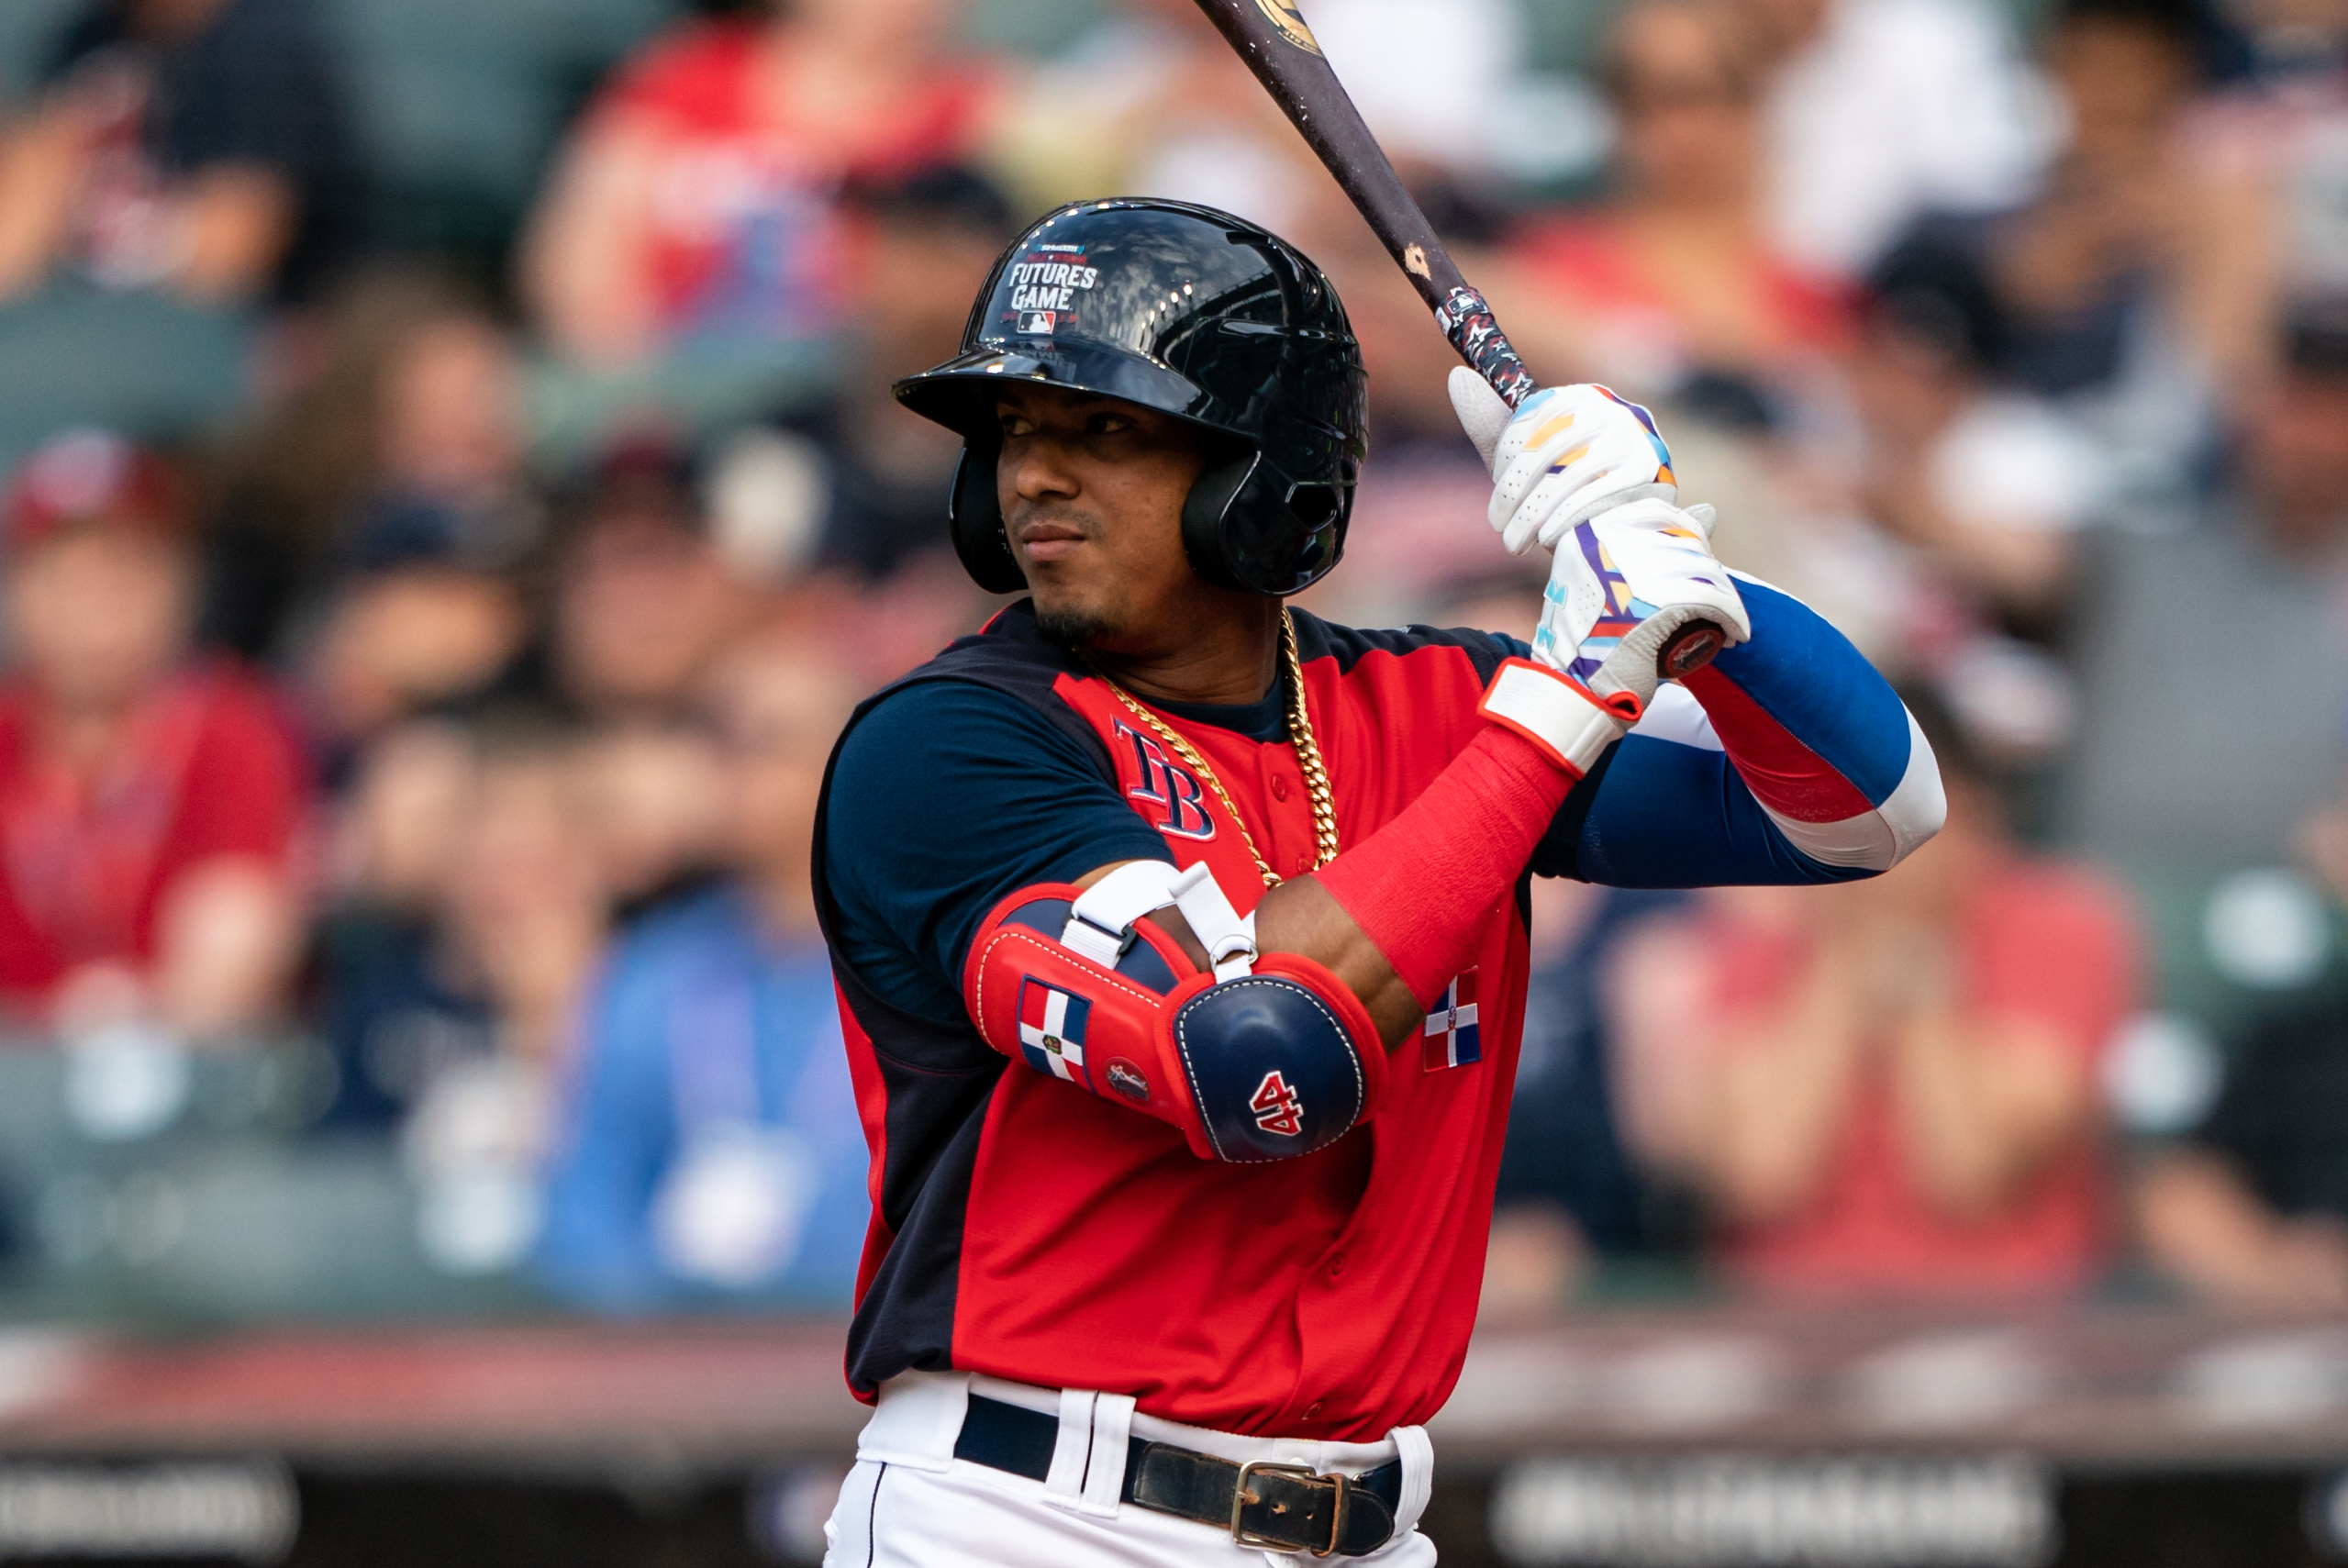 Ranking the Top Prospects for All 30 MLB Teams Entering 2020